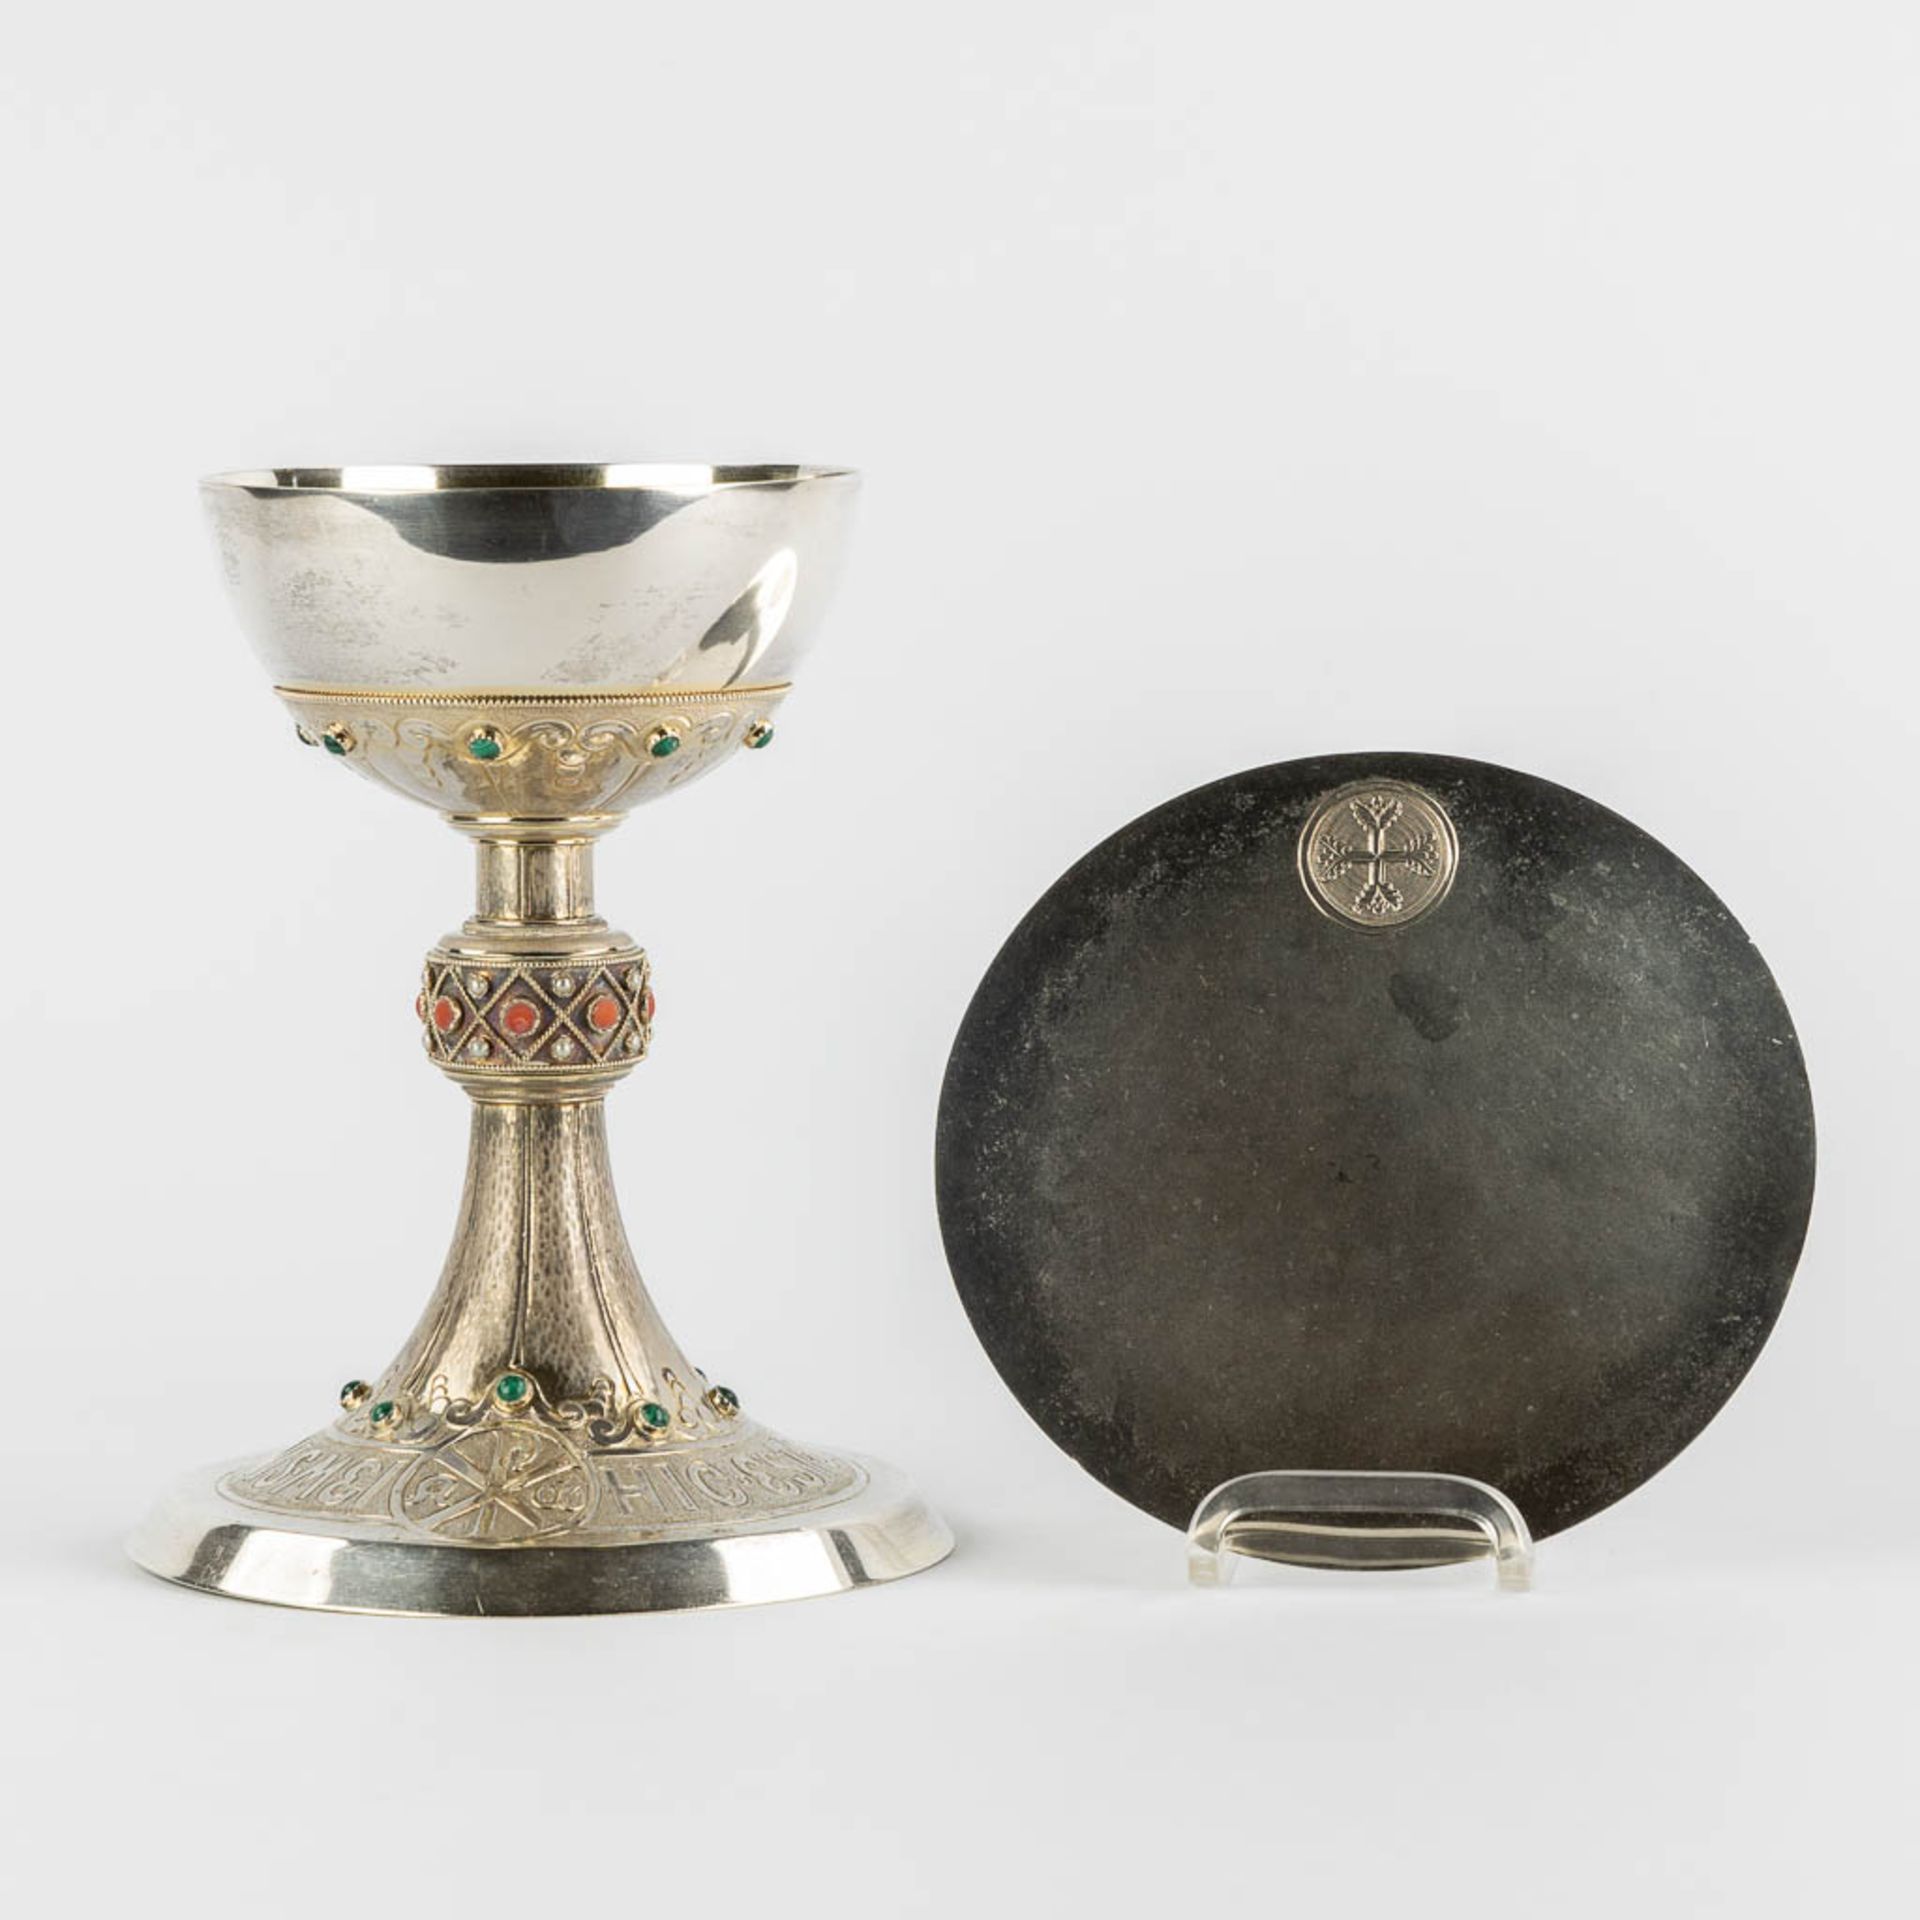 Joh ALOYS BRUUN (XIX) A chalice with paten, silver decorated with cabochons, malachite and pearls. G